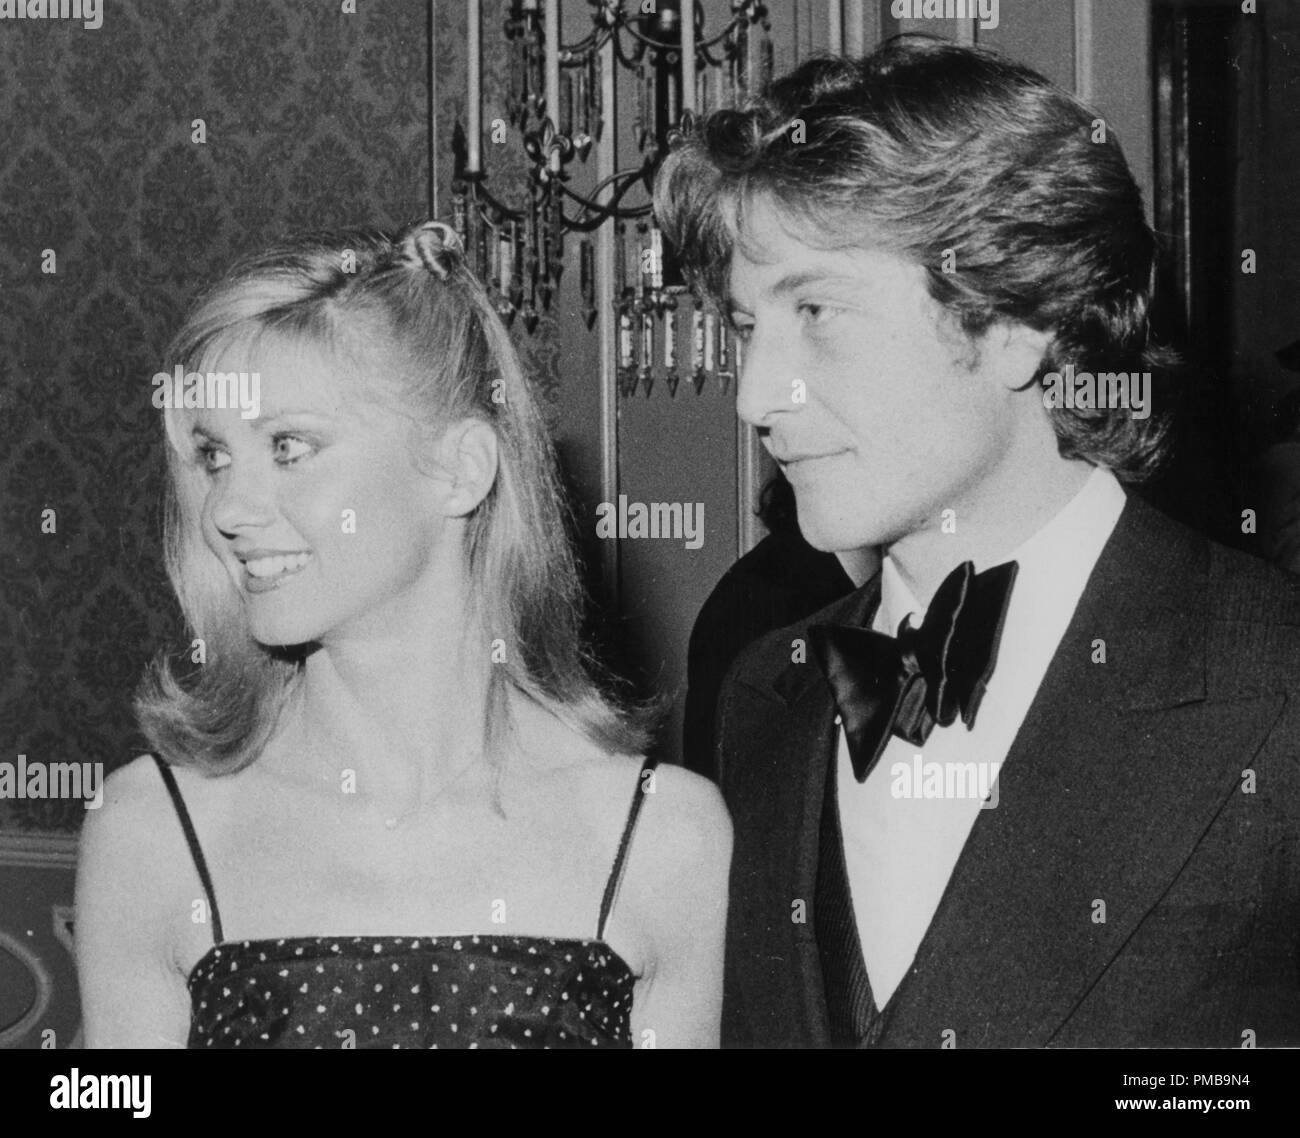 Olivia Newton-John with her date, Lee Krame,r at the 36th Annual Golden Globe Awards, 1979  File Reference # 32557_889THA Stock Photo